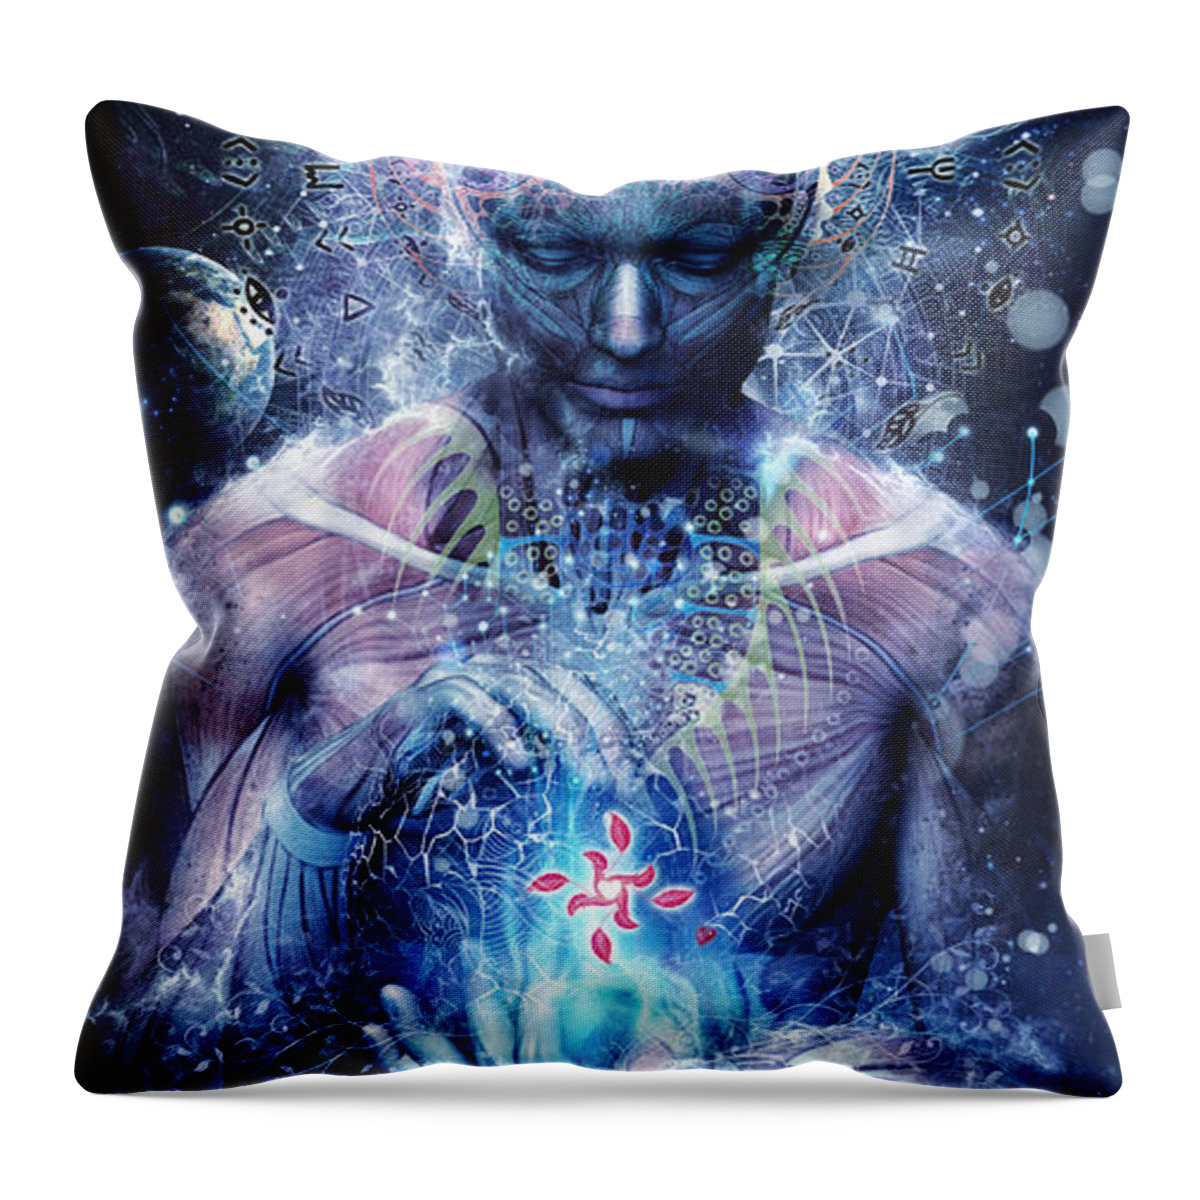 Spiritual Throw Pillow featuring the digital art Silence Seekers by Cameron Gray